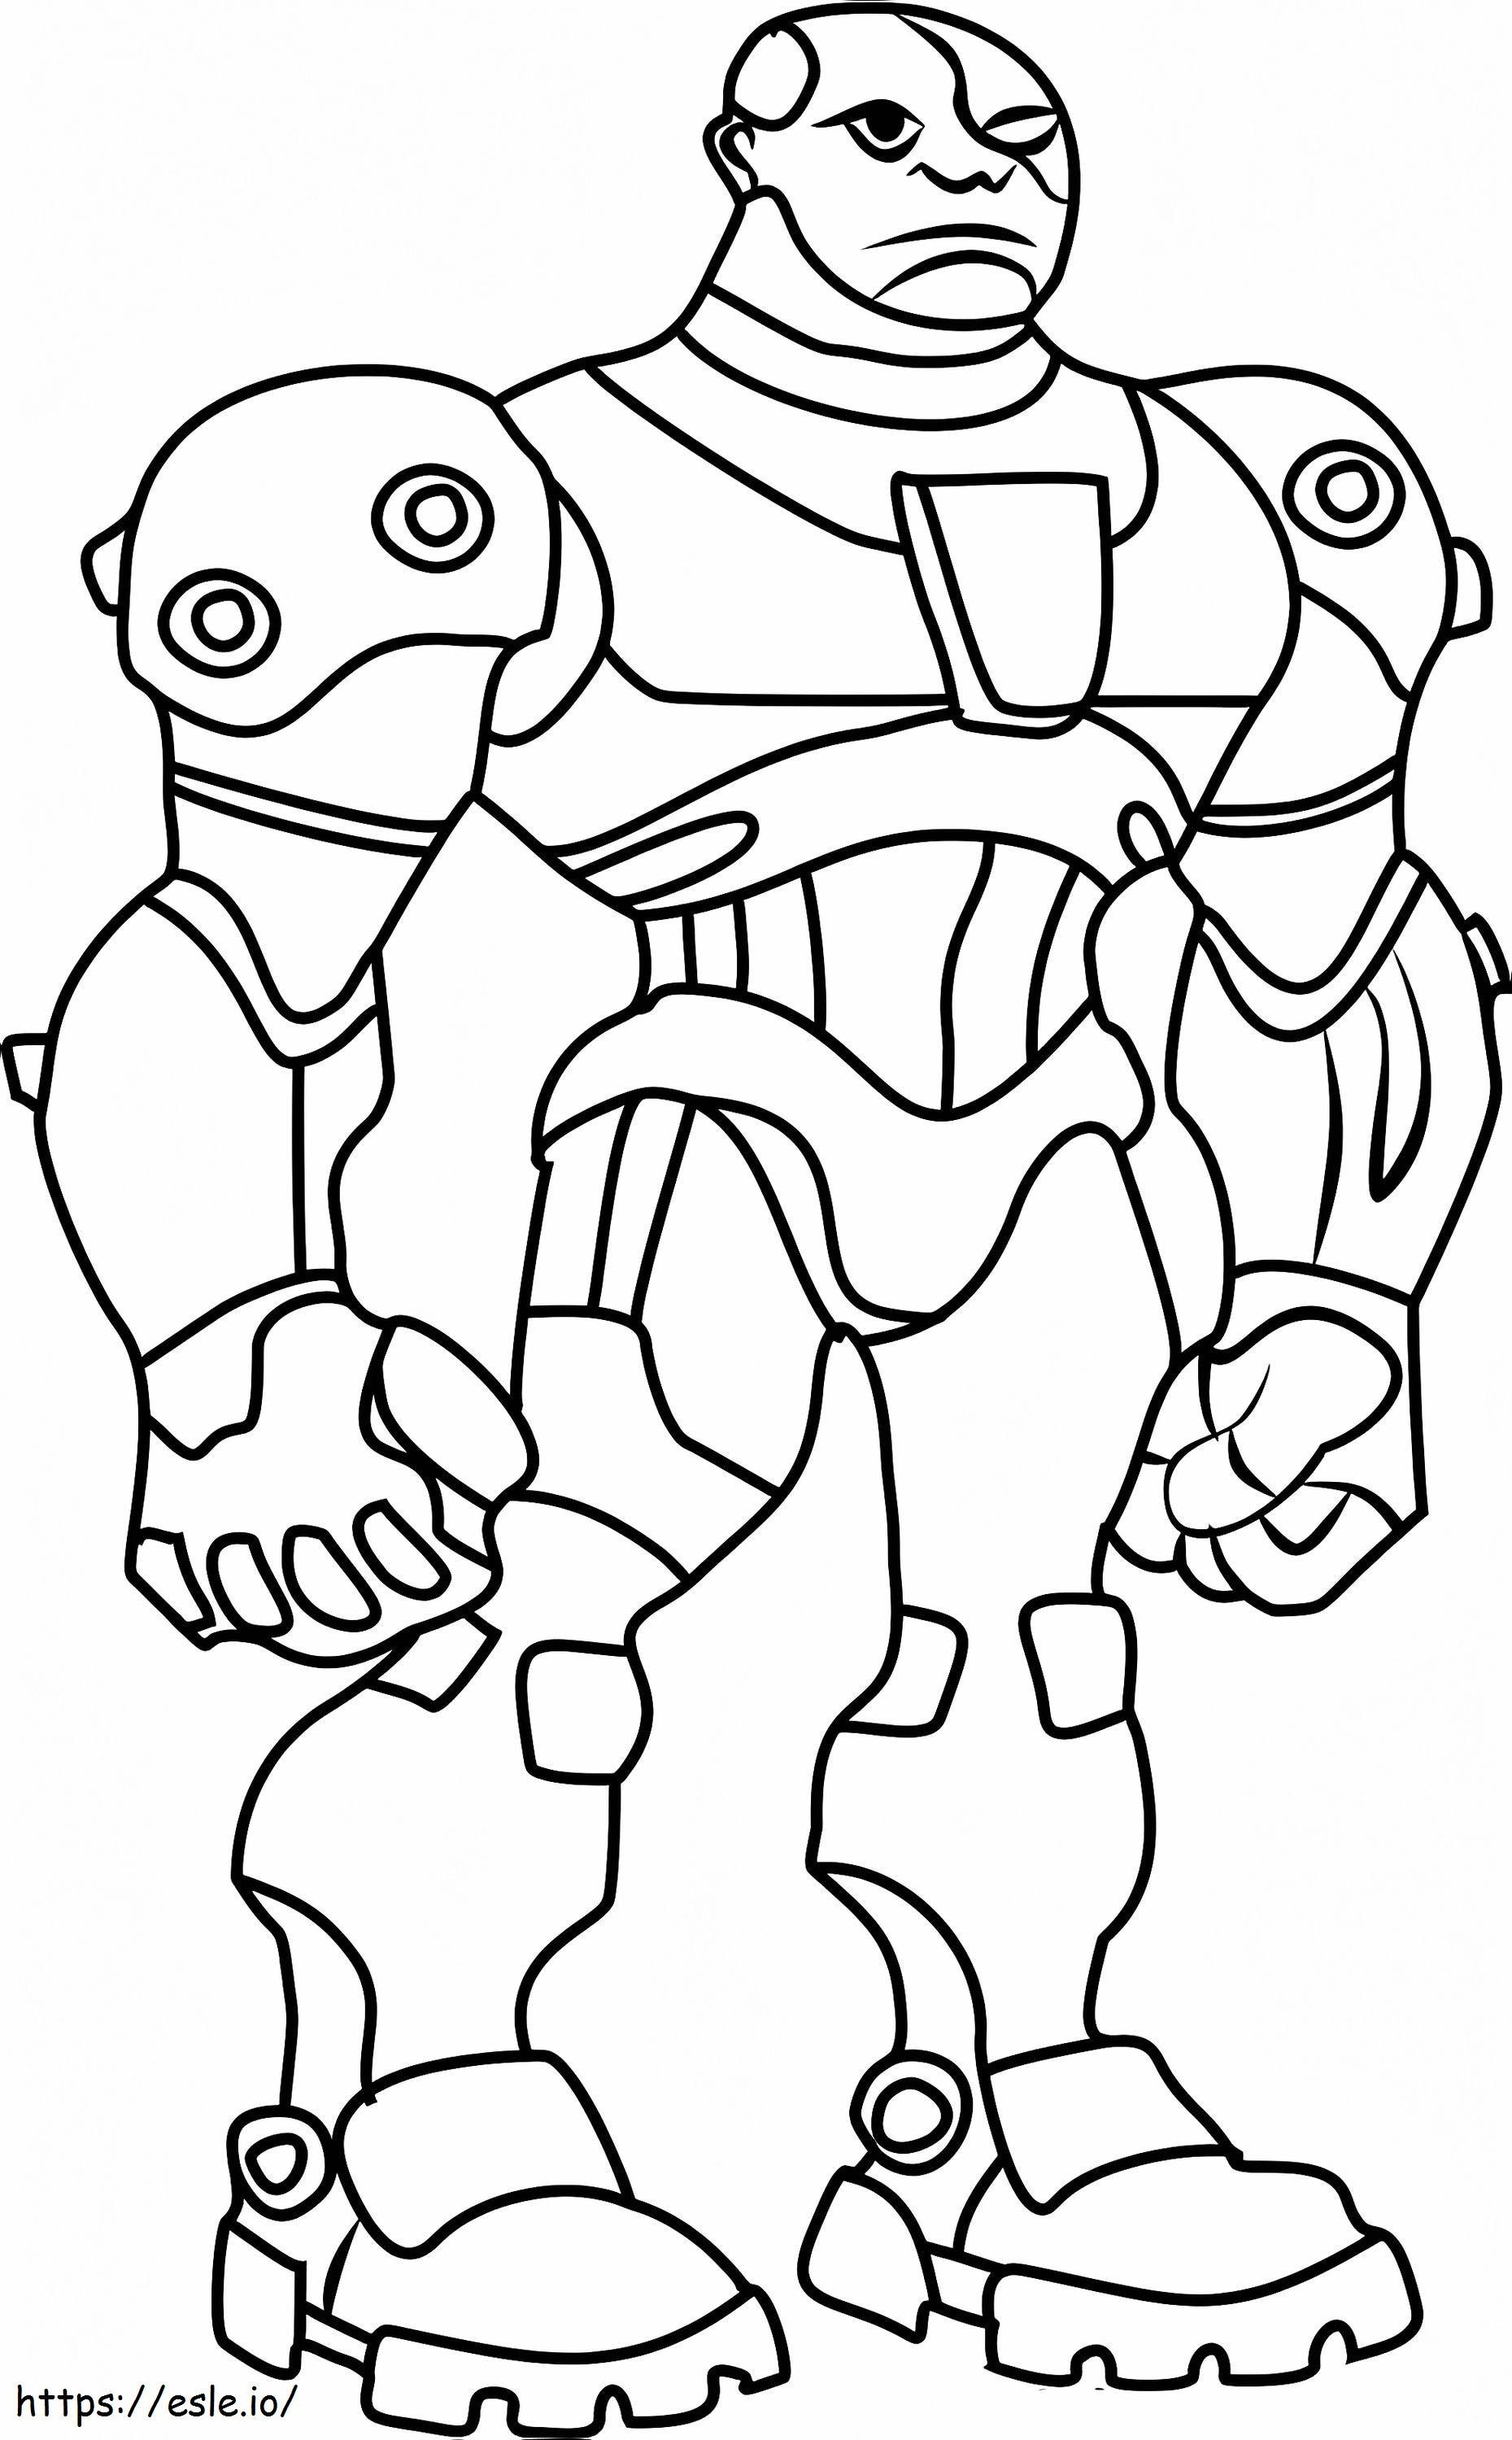 Basic Cyborg coloring page